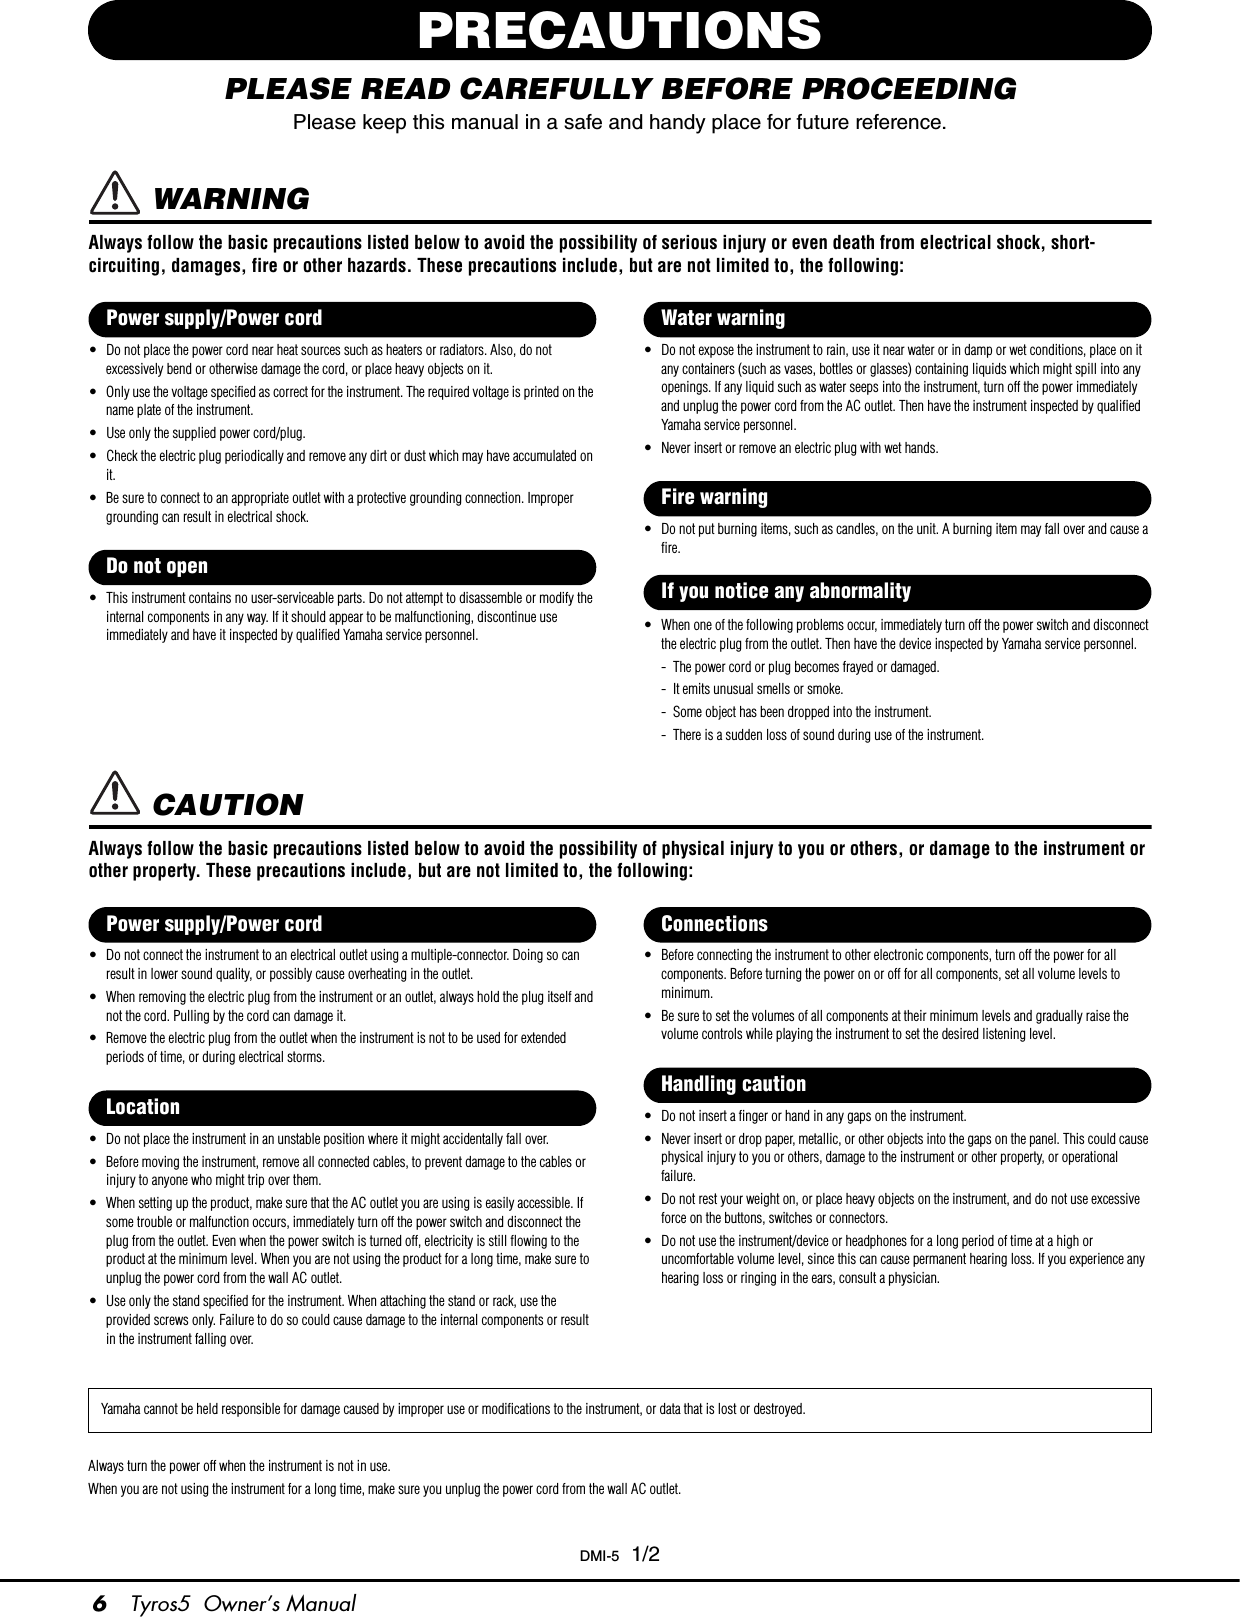 6Tyros5  Owner’s ManualPRECAUTIONSPLEASE READ CAREFULLY BEFORE PROCEEDINGPlease keep this manual in a safe and handy place for future reference. WARNINGAlways follow the basic precautions listed below to avoid the possibility of serious injury or even death from electrical shock, short-circuiting, damages, fire or other hazards. These precautions include, but are not limited to, the following:• Do not place the power cord near heat sources such as heaters or radiators. Also, do not excessively bend or otherwise damage the cord, or place heavy objects on it.• Only use the voltage specified as correct for the instrument. The required voltage is printed on the name plate of the instrument.• Use only the supplied power cord/plug.• Check the electric plug periodically and remove any dirt or dust which may have accumulated on it.• Be sure to connect to an appropriate outlet with a protective grounding connection. Improper grounding can result in electrical shock.• This instrument contains no user-serviceable parts. Do not attempt to disassemble or modify the internal components in any way. If it should appear to be malfunctioning, discontinue use immediately and have it inspected by qualified Yamaha service personnel.• Do not expose the instrument to rain, use it near water or in damp or wet conditions, place on it any containers (such as vases, bottles or glasses) containing liquids which might spill into any openings. If any liquid such as water seeps into the instrument, turn off the power immediately and unplug the power cord from the AC outlet. Then have the instrument inspected by qualified Yamaha service personnel.• Never insert or remove an electric plug with wet hands.• Do not put burning items, such as candles, on the unit. A burning item may fall over and cause a fire.• When one of the following problems occur, immediately turn off the power switch and disconnect the electric plug from the outlet. Then have the device inspected by Yamaha service personnel.- The power cord or plug becomes frayed or damaged.- It emits unusual smells or smoke.- Some object has been dropped into the instrument.- There is a sudden loss of sound during use of the instrument. CAUTIONAlways follow the basic precautions listed below to avoid the possibility of physical injury to you or others, or damage to the instrument or other property. These precautions include, but are not limited to, the following:• Do not connect the instrument to an electrical outlet using a multiple-connector. Doing so can result in lower sound quality, or possibly cause overheating in the outlet.• When removing the electric plug from the instrument or an outlet, always hold the plug itself and not the cord. Pulling by the cord can damage it.• Remove the electric plug from the outlet when the instrument is not to be used for extended periods of time, or during electrical storms.• Do not place the instrument in an unstable position where it might accidentally fall over.• Before moving the instrument, remove all connected cables, to prevent damage to the cables or injury to anyone who might trip over them.• When setting up the product, make sure that the AC outlet you are using is easily accessible. If some trouble or malfunction occurs, immediately turn off the power switch and disconnect the plug from the outlet. Even when the power switch is turned off, electricity is still flowing to the product at the minimum level. When you are not using the product for a long time, make sure to unplug the power cord from the wall AC outlet.• Use only the stand specified for the instrument. When attaching the stand or rack, use the provided screws only. Failure to do so could cause damage to the internal components or result in the instrument falling over.• Before connecting the instrument to other electronic components, turn off the power for all components. Before turning the power on or off for all components, set all volume levels to minimum.• Be sure to set the volumes of all components at their minimum levels and gradually raise the volume controls while playing the instrument to set the desired listening level.• Do not insert a finger or hand in any gaps on the instrument.• Never insert or drop paper, metallic, or other objects into the gaps on the panel. This could cause physical injury to you or others, damage to the instrument or other property, or operational failure.• Do not rest your weight on, or place heavy objects on the instrument, and do not use excessive force on the buttons, switches or connectors.• Do not use the instrument/device or headphones for a long period of time at a high or uncomfortable volume level, since this can cause permanent hearing loss. If you experience any hearing loss or ringing in the ears, consult a physician.Always turn the power off when the instrument is not in use. When you are not using the instrument for a long time, make sure you unplug the power cord from the wall AC outlet.Power supply/Power cordDo not openWater warningFire warningIf you notice any abnormalityPower supply/Power cordLocationConnectionsHandling cautionYamaha cannot be held responsible for damage caused by improper use or modifications to the instrument, or data that is lost or destroyed.DMI-5  1/2